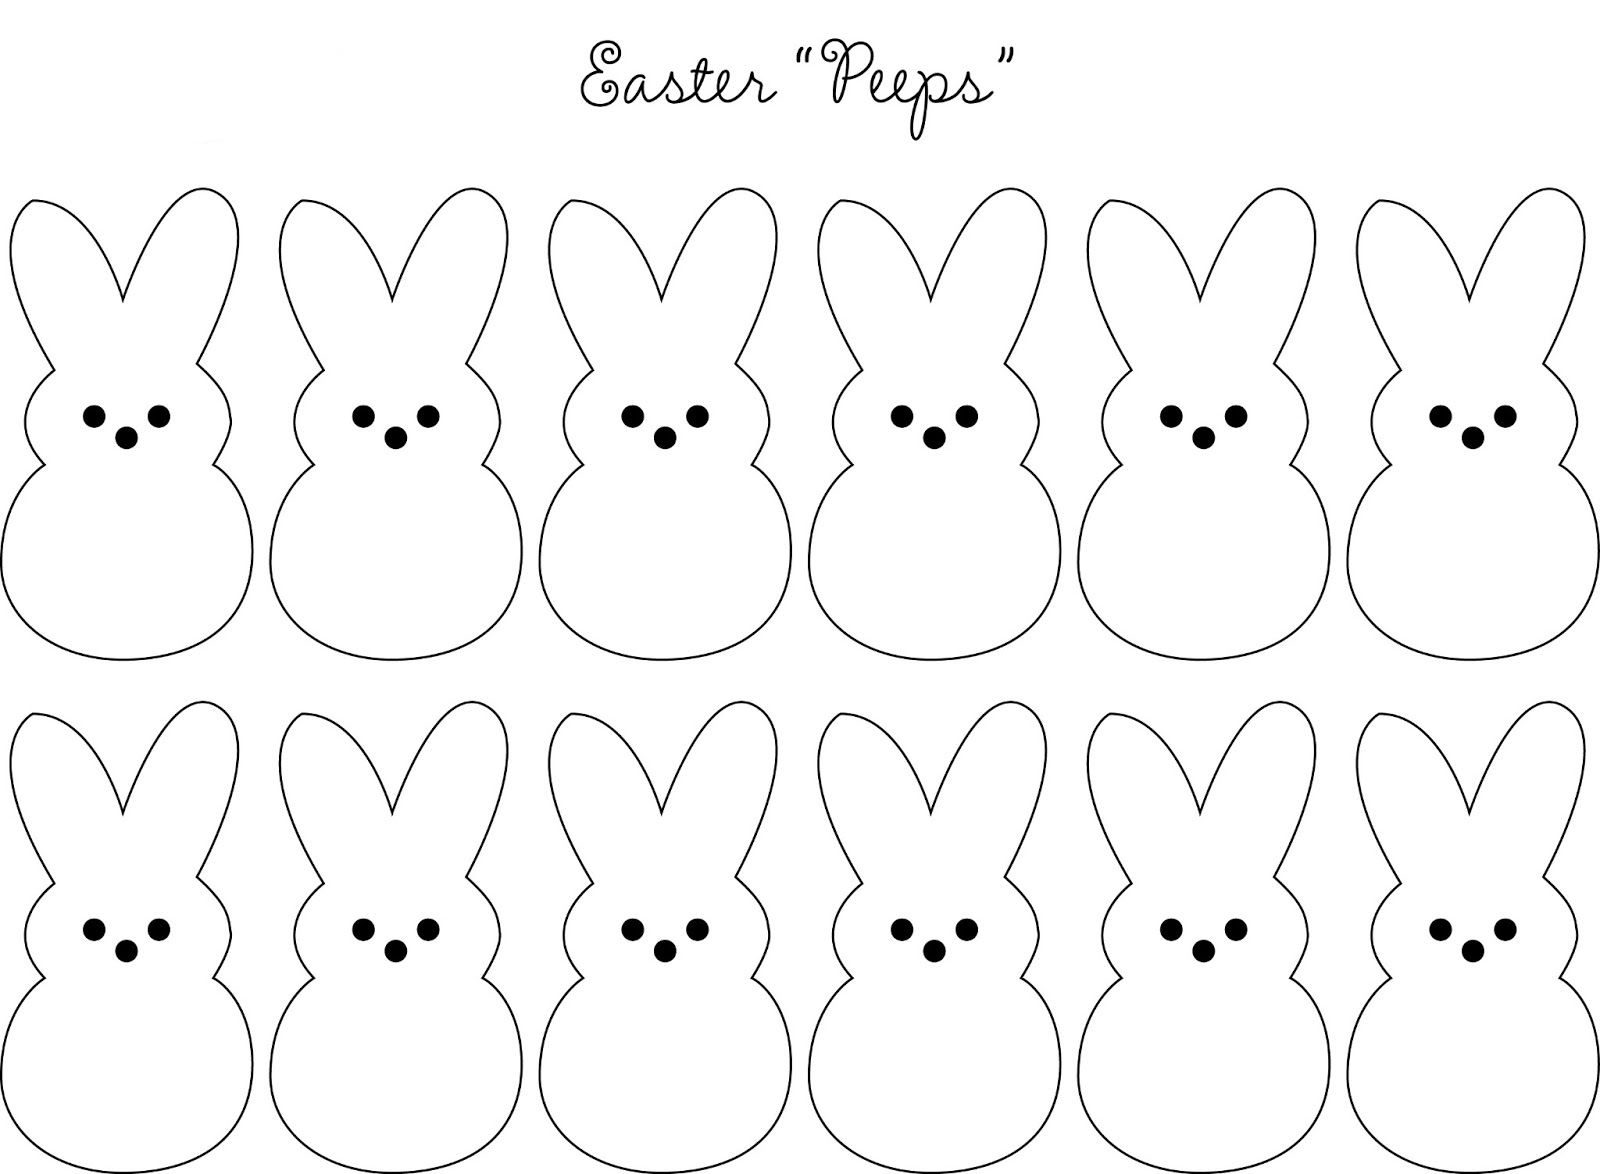 printable-easter-activities-best-coloring-pages-for-kids